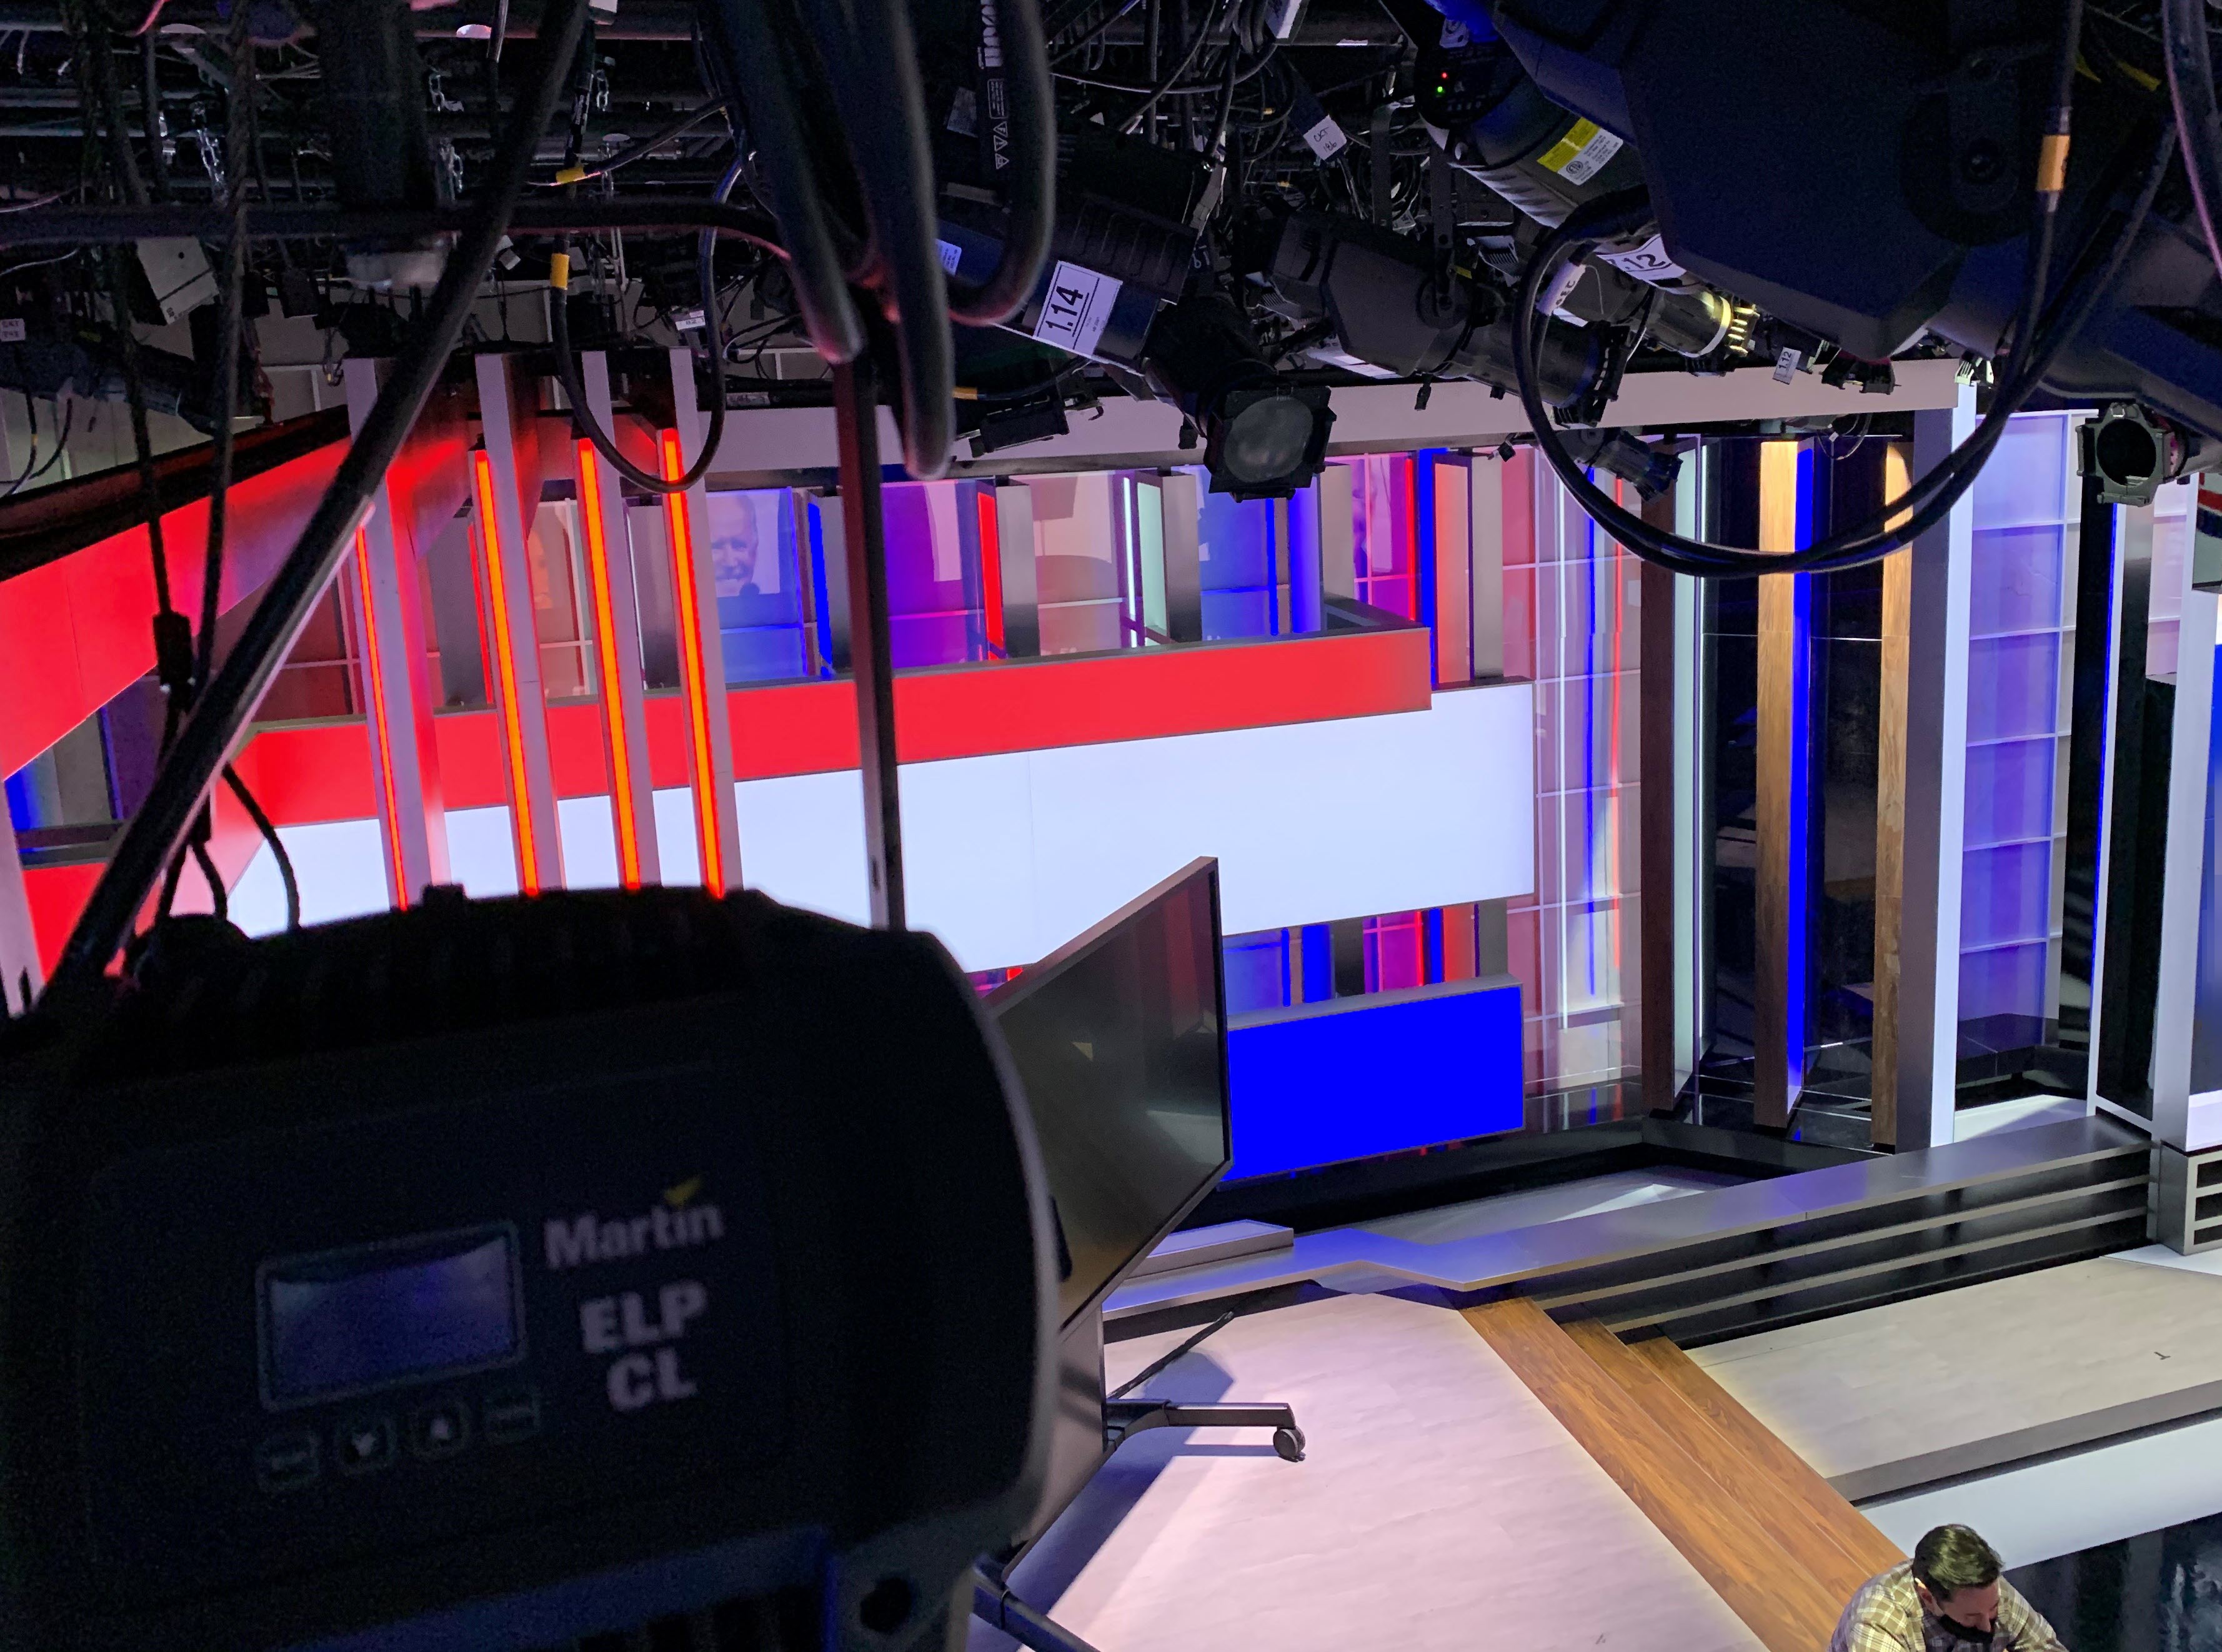 CNBC Equips New Studio B Set With More Than 250 Martin LED Lighting Fixtures for The News With Shepard Smith